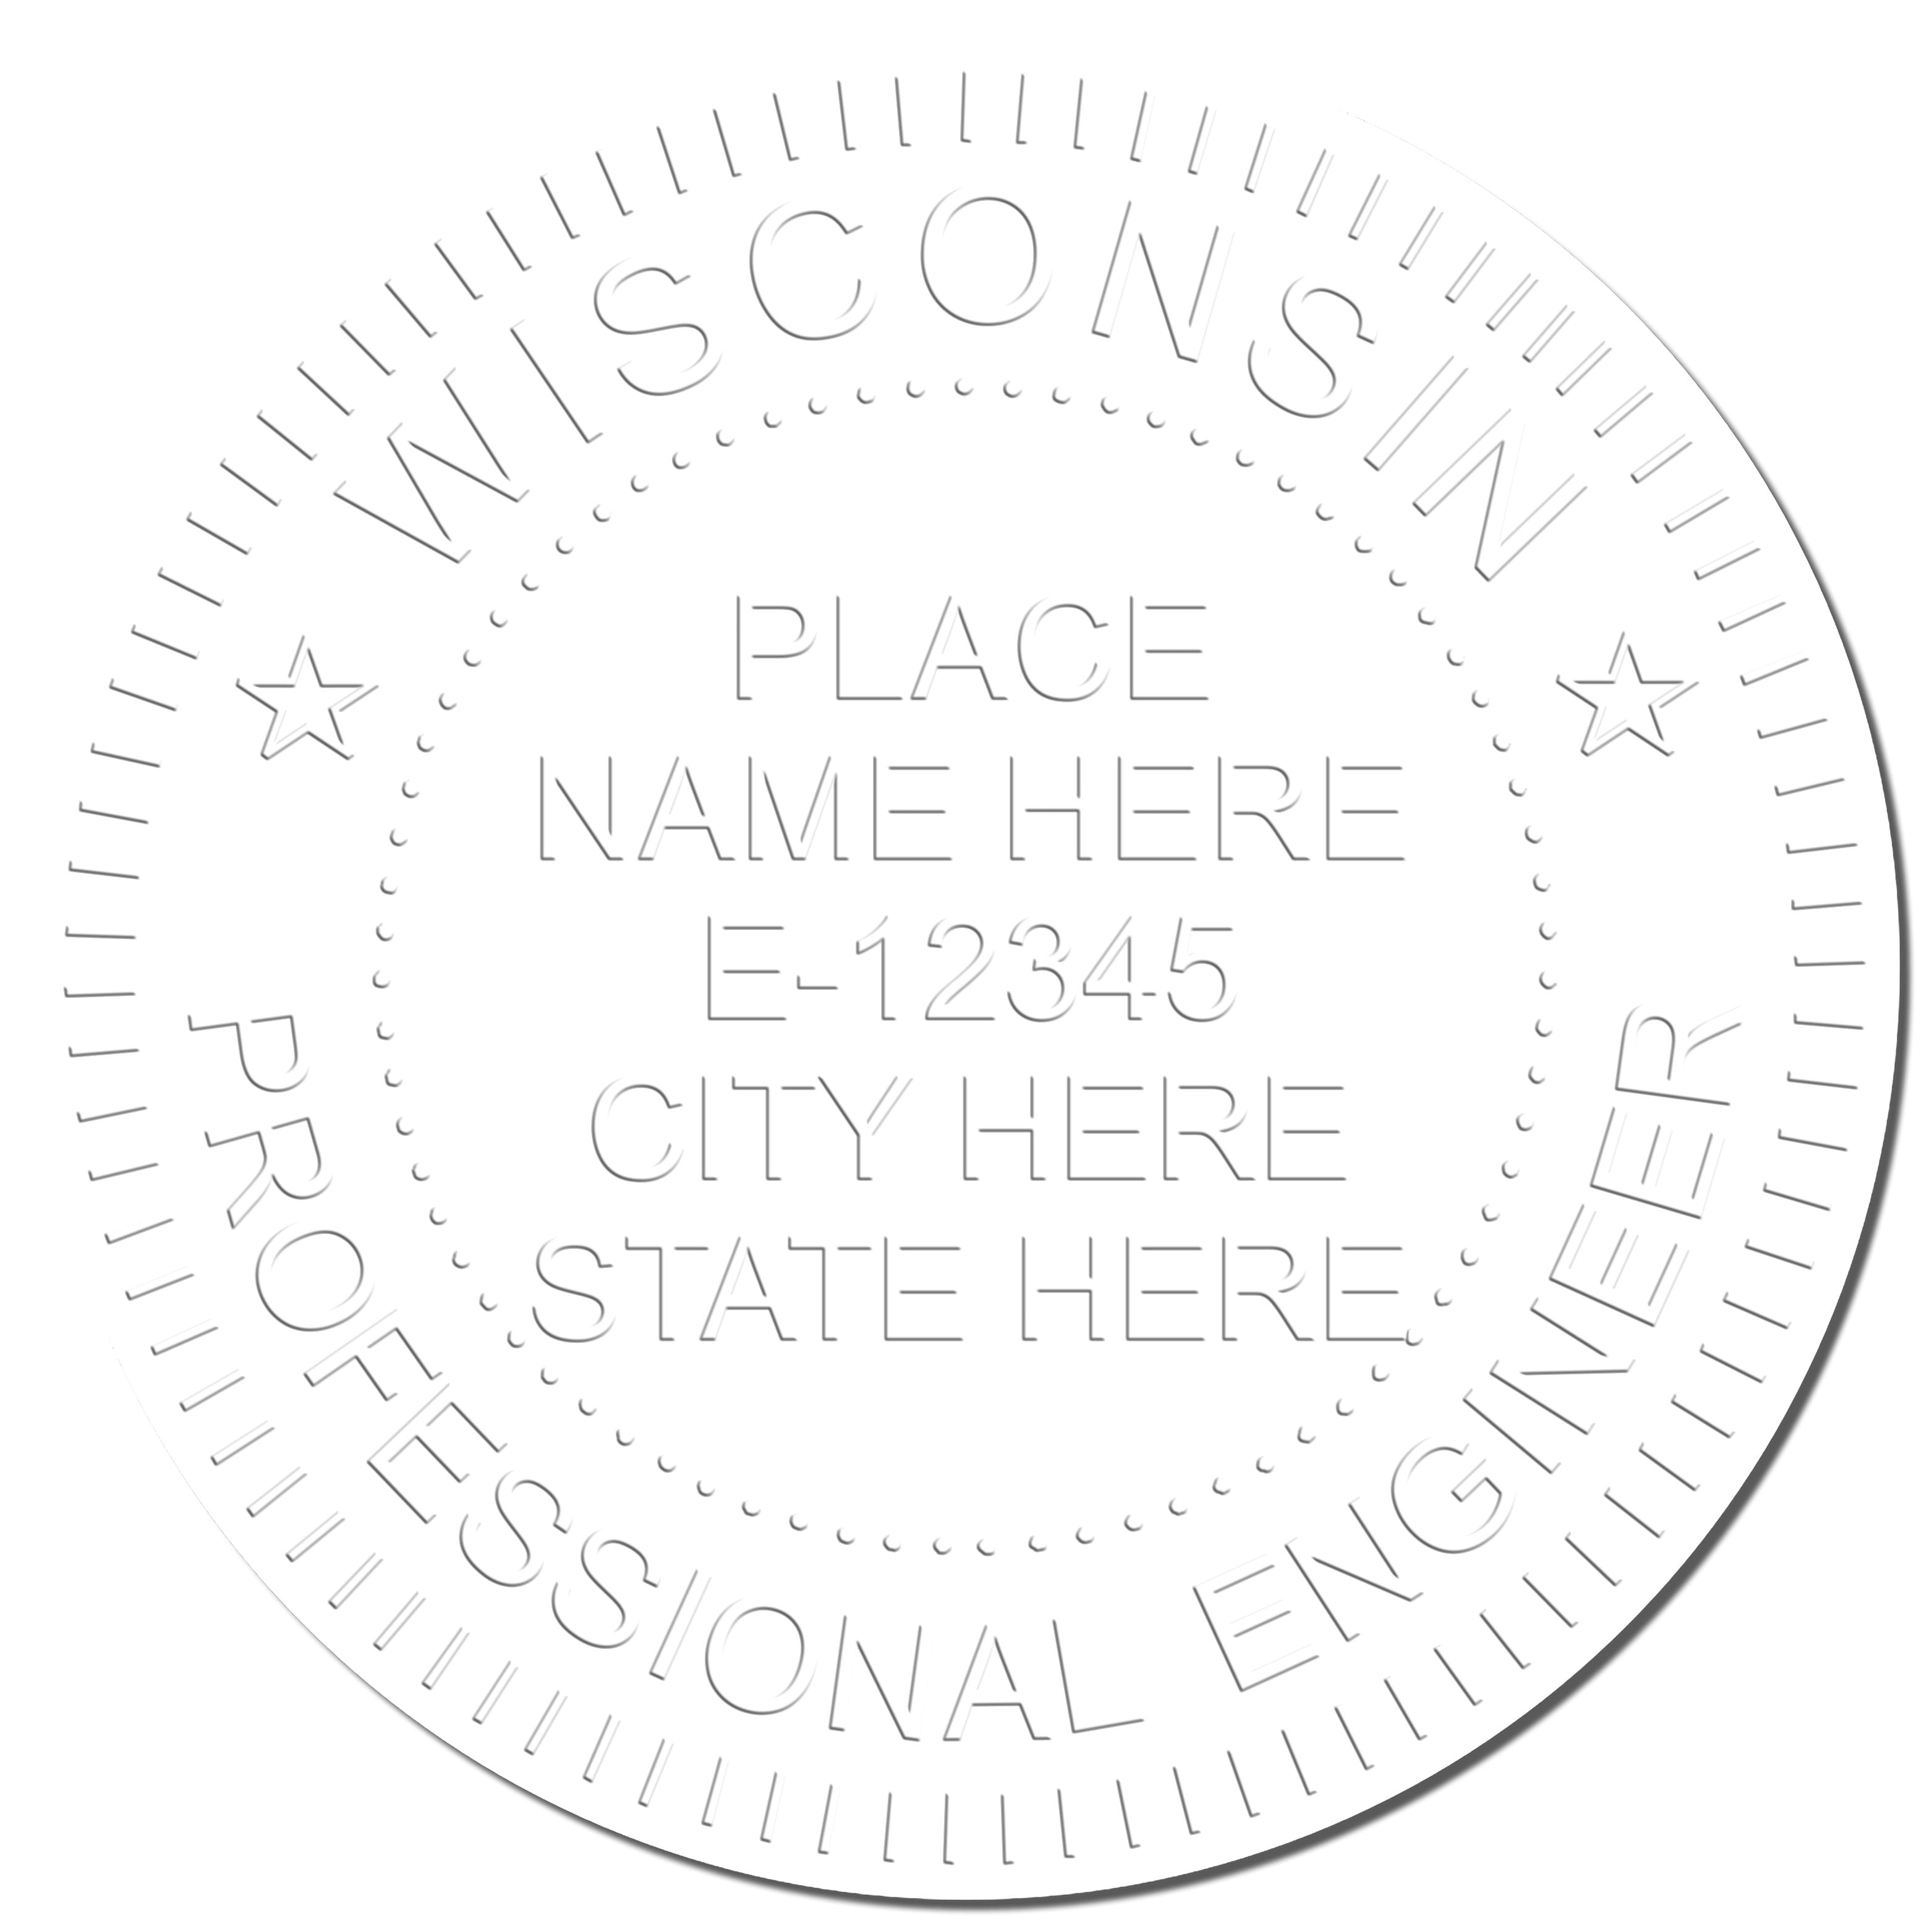 A photograph of the Handheld Wisconsin Professional Engineer Embosser stamp impression reveals a vivid, professional image of the on paper.